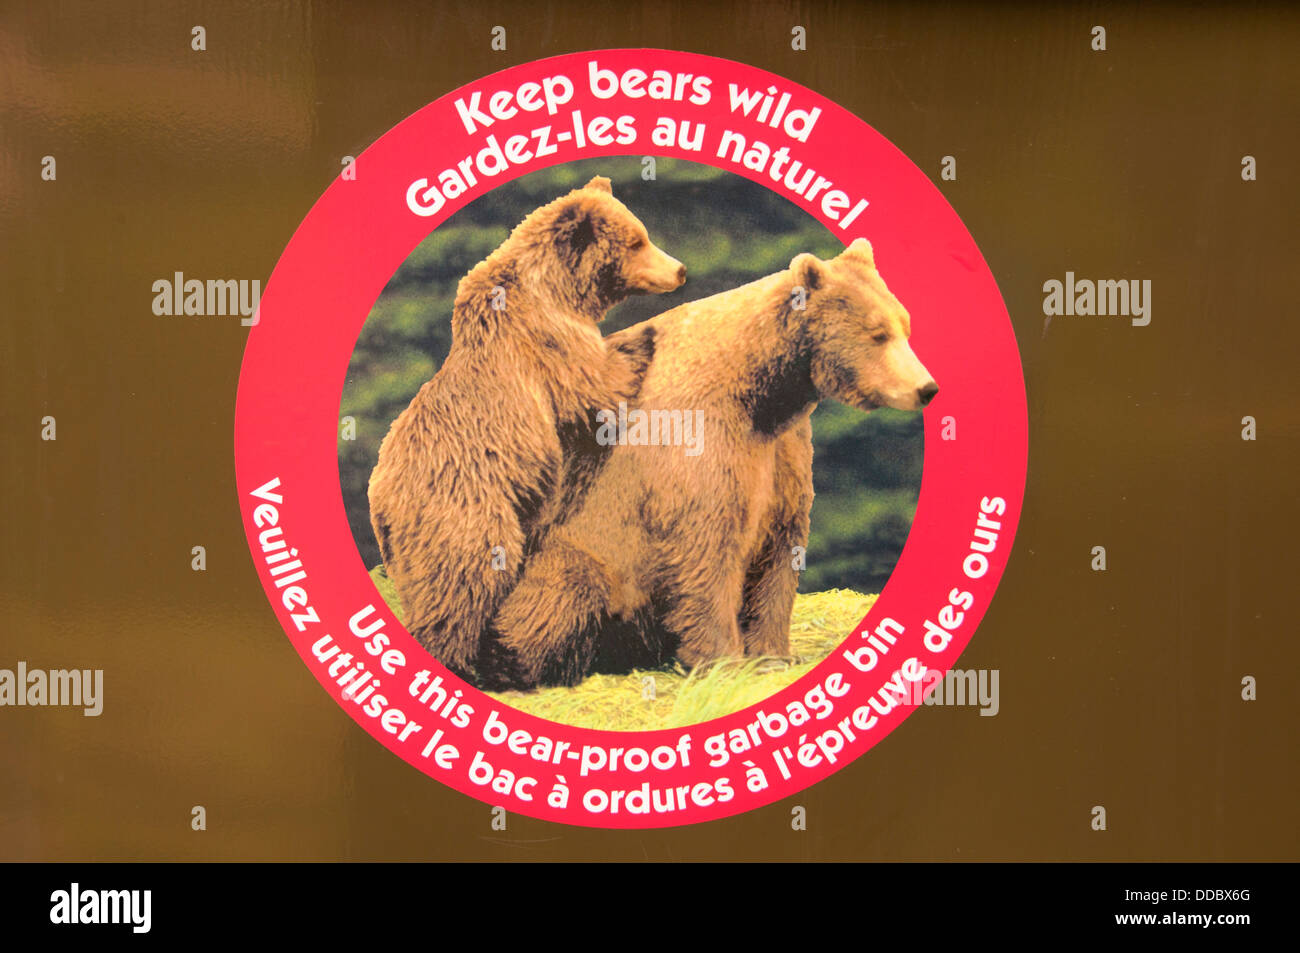 wall to wall decorating grizzly bear activity is high warning sign US Seller 